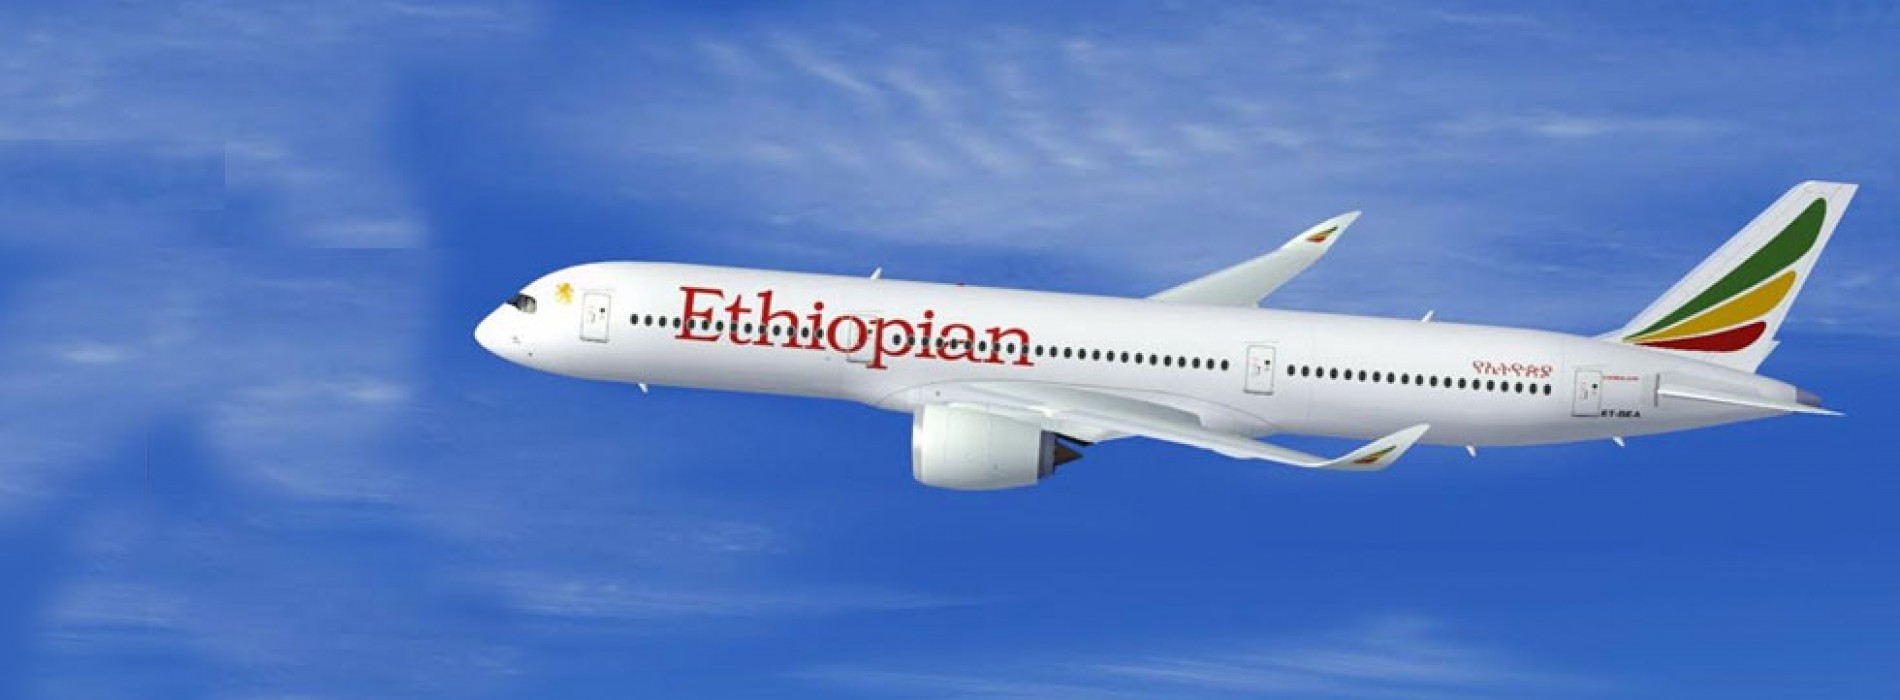 Ethiopian Airlines offers great connectivity to Addis Ababa